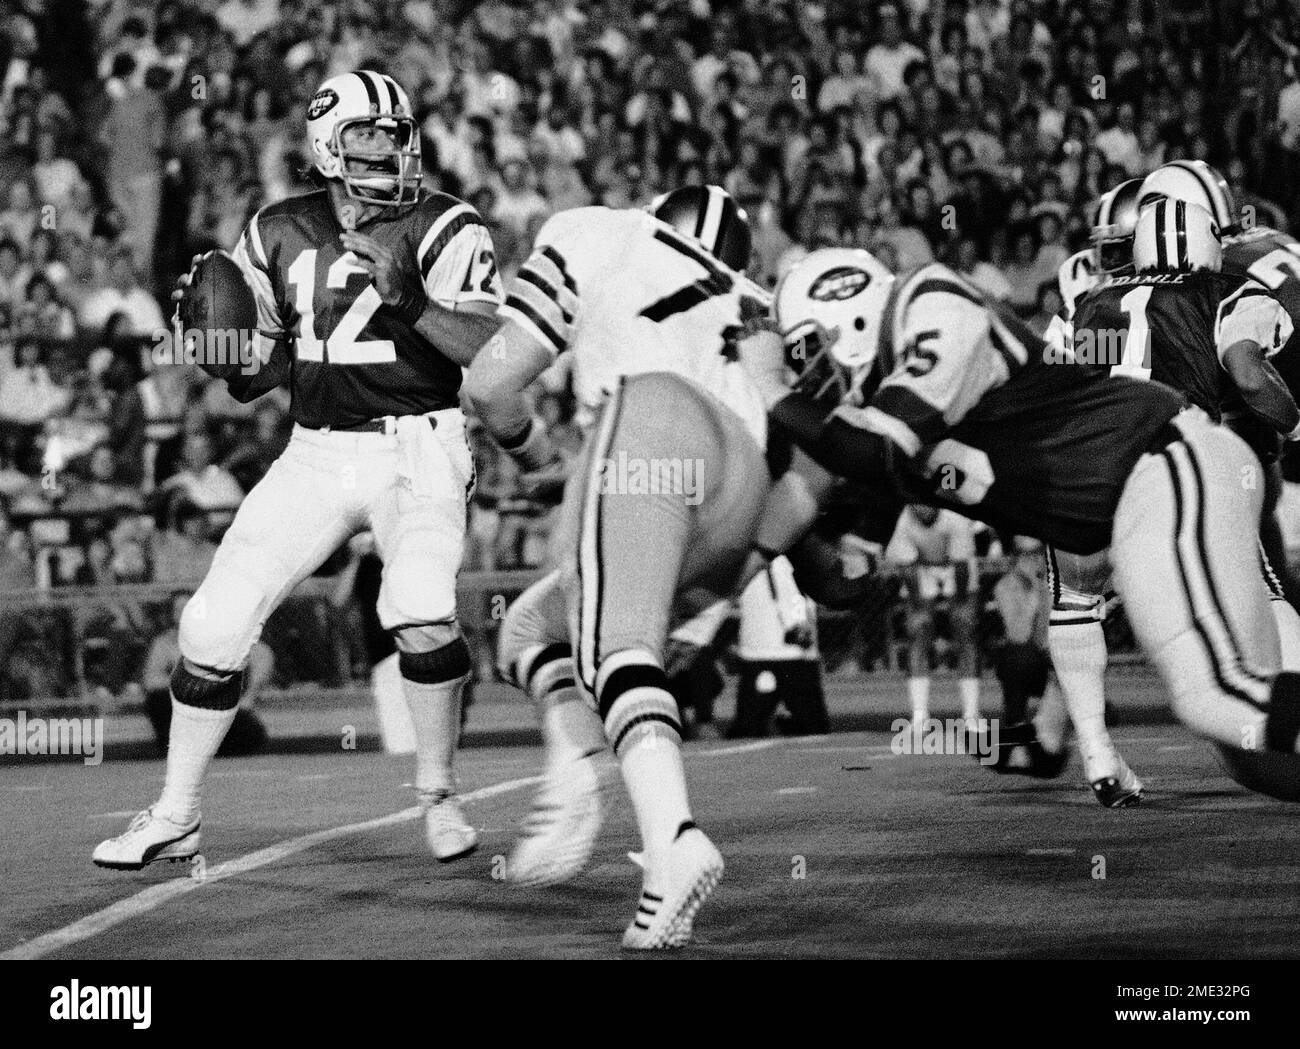 FILE- In this Sept. 2, 1973, file photo, New York Jets' Joe Namath